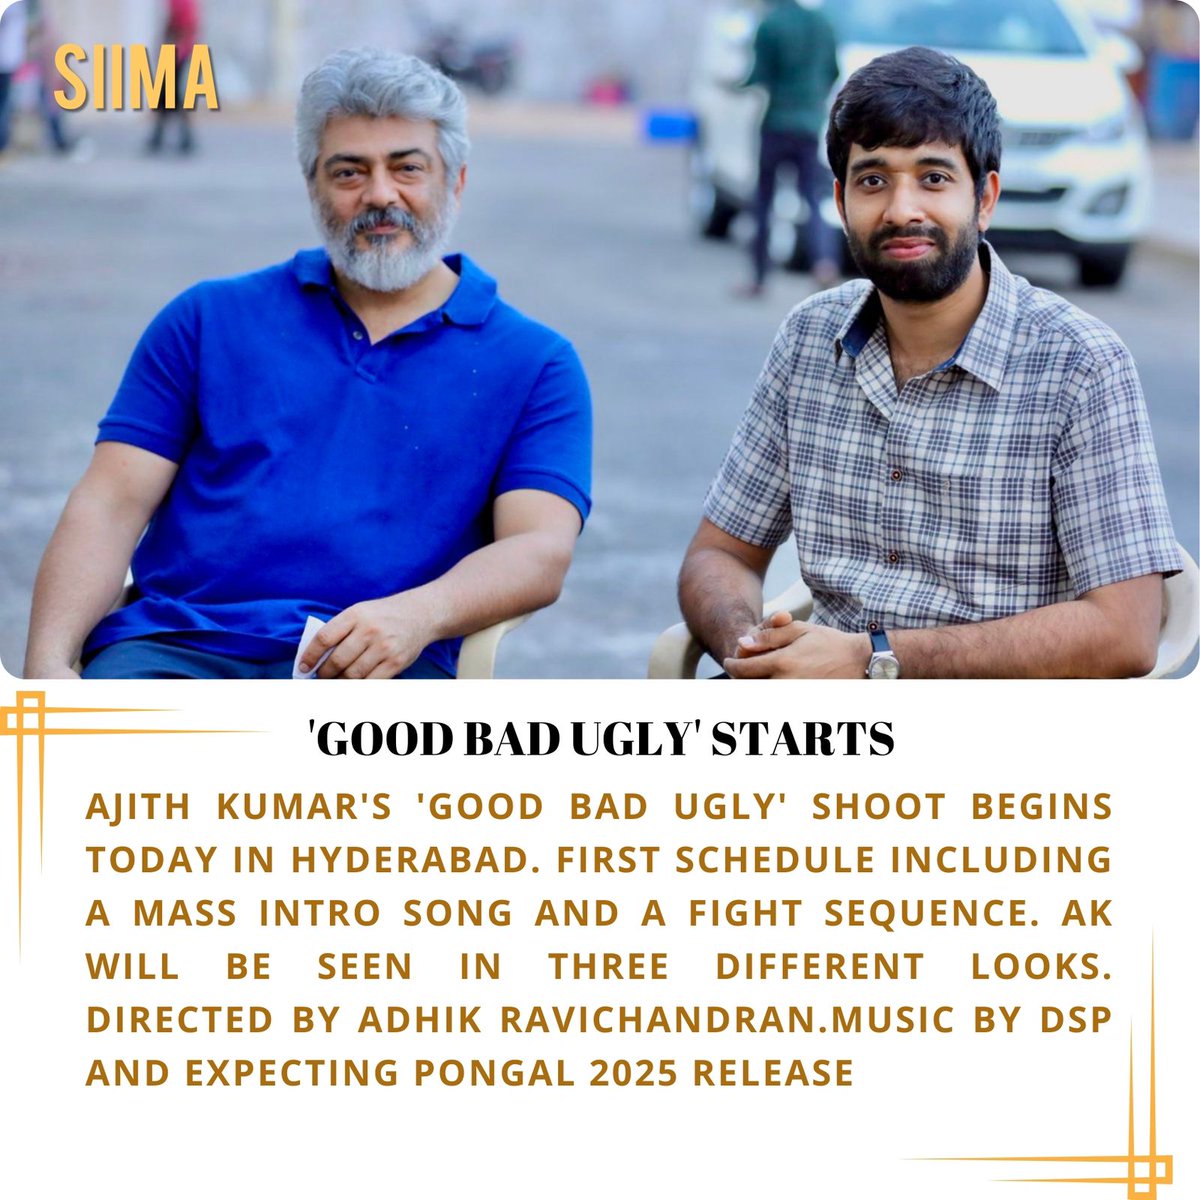 🎬 Lights, camera, action! The journey of 'Good Bad Ugly' begins today in Hyderabad! Get ready for the ultimate cinematic experience with #AjithKumar in three different avatars. Directed by @Adhikravi, with music by DSP. Pongal 2025, here we come! #GoodBadUgly #Ajith #ThalaAjith…